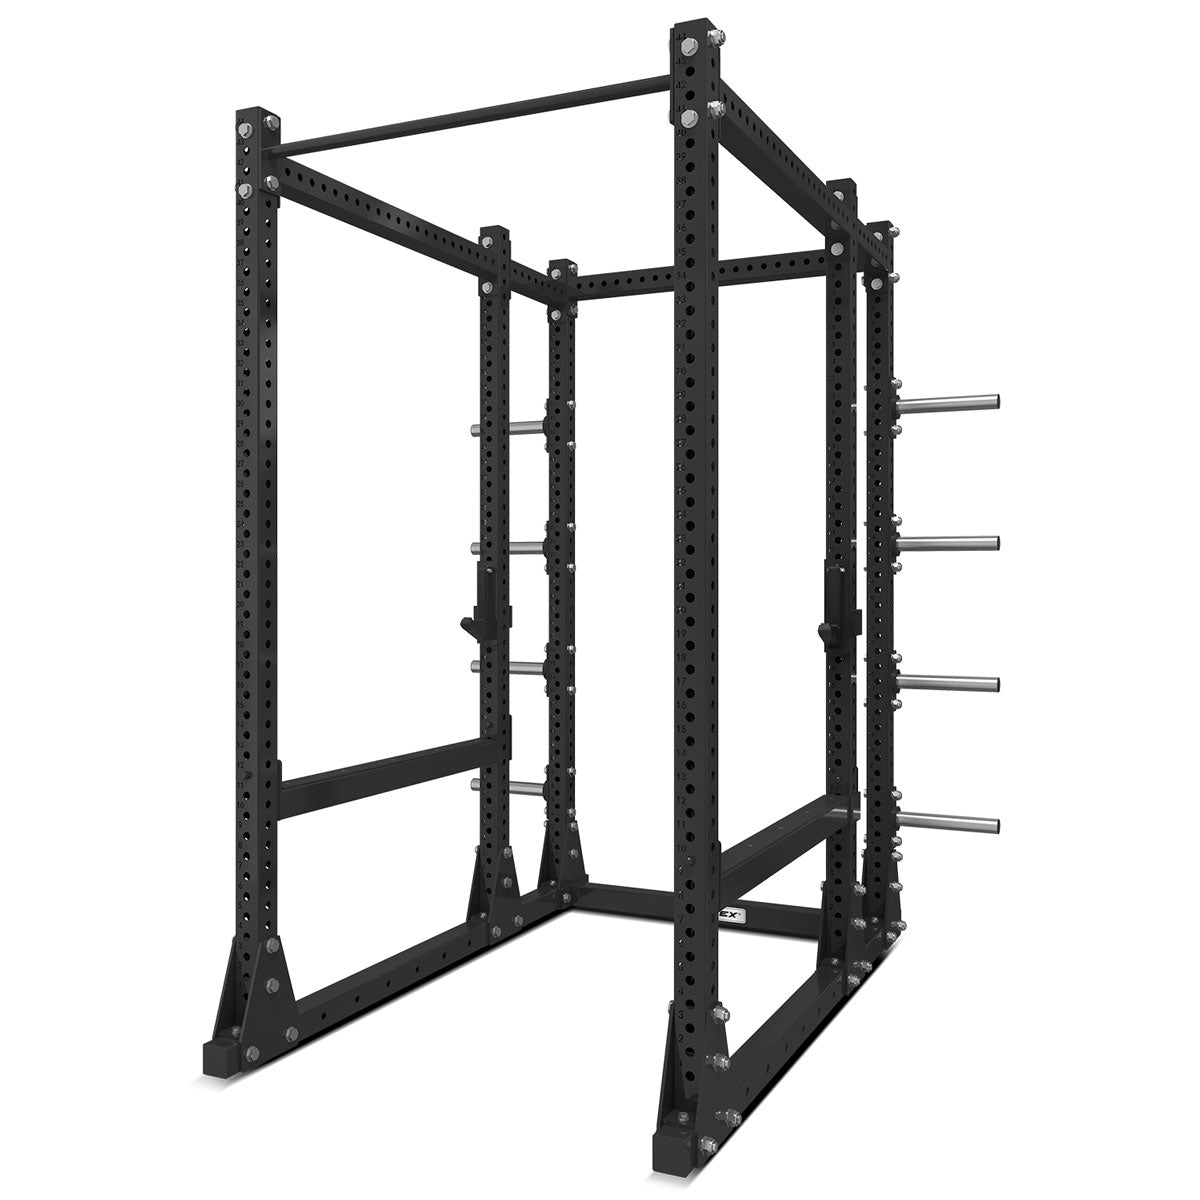 CORTEX ALPHA Series ARK06 Commerical Full Rack with Storage + 100kg of Olympic Weights and Barbell